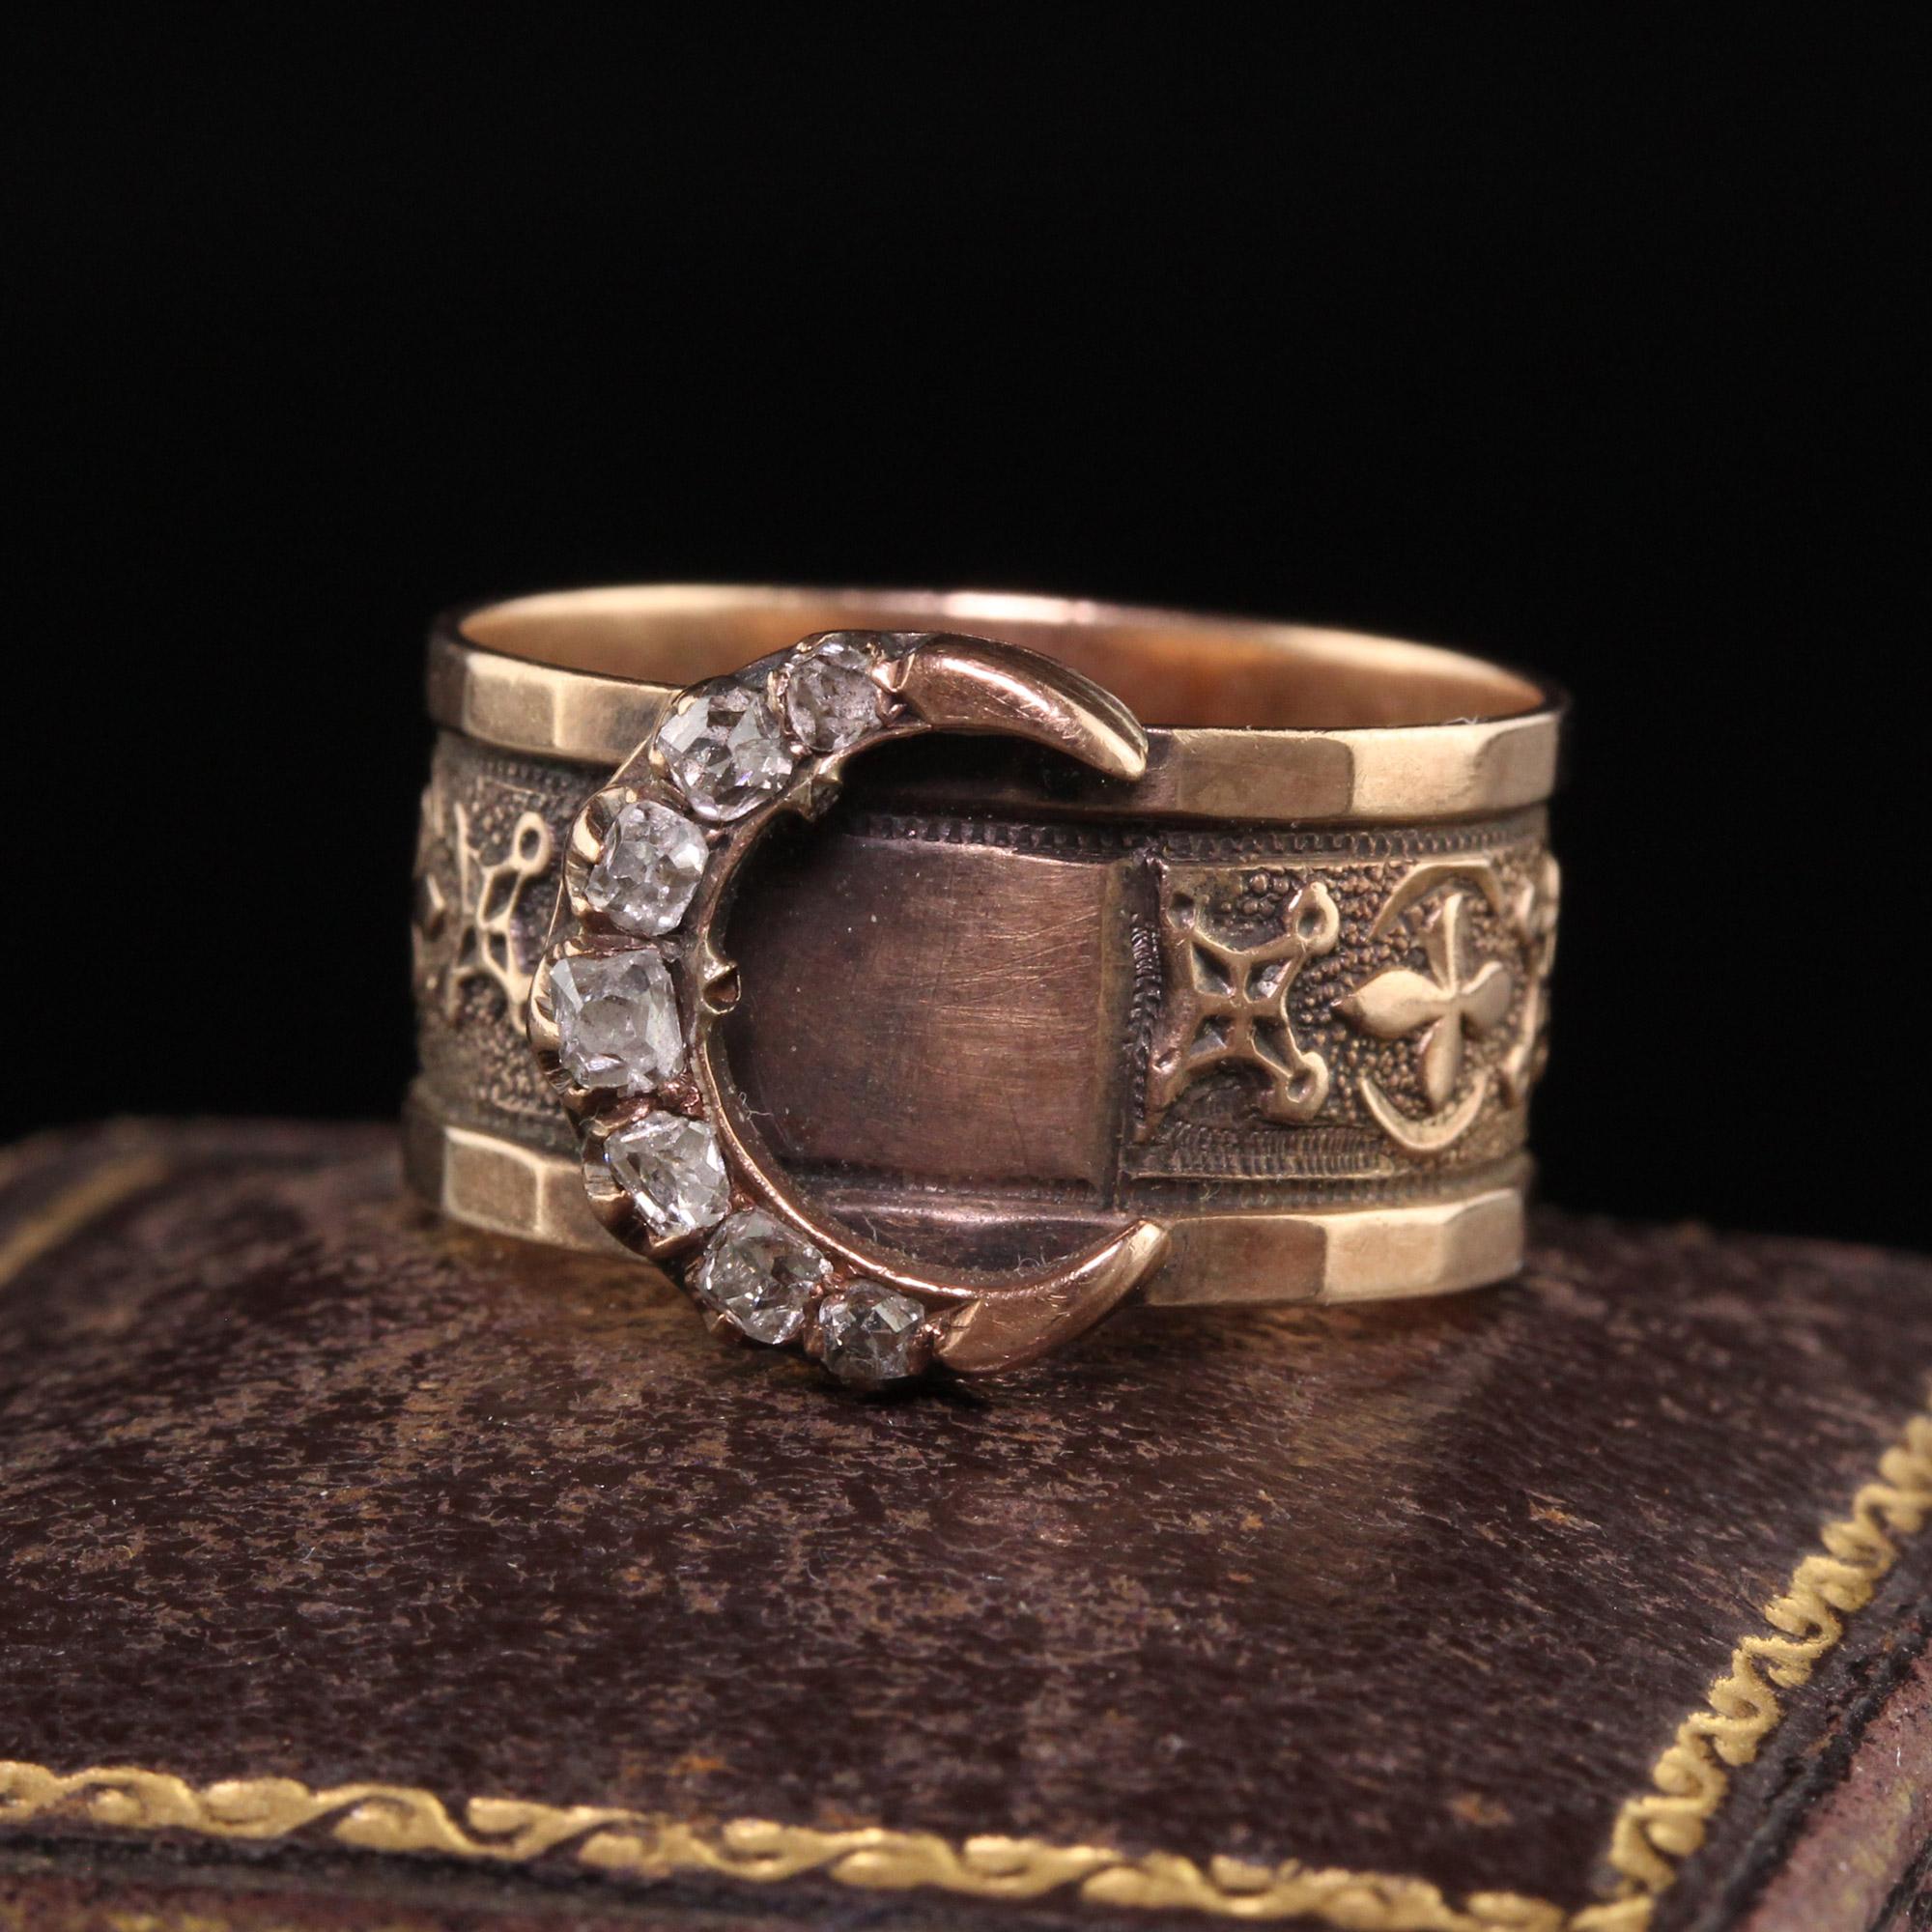 Beautiful Antique Victorian 10K Yellow Gold Old Mine Diamond Crescent Ring. This beautiful ring is crafted in 10k yellow gold. The center holds a crescent that has old mine cut diamonds on it. The band is beautifully engraved and in great